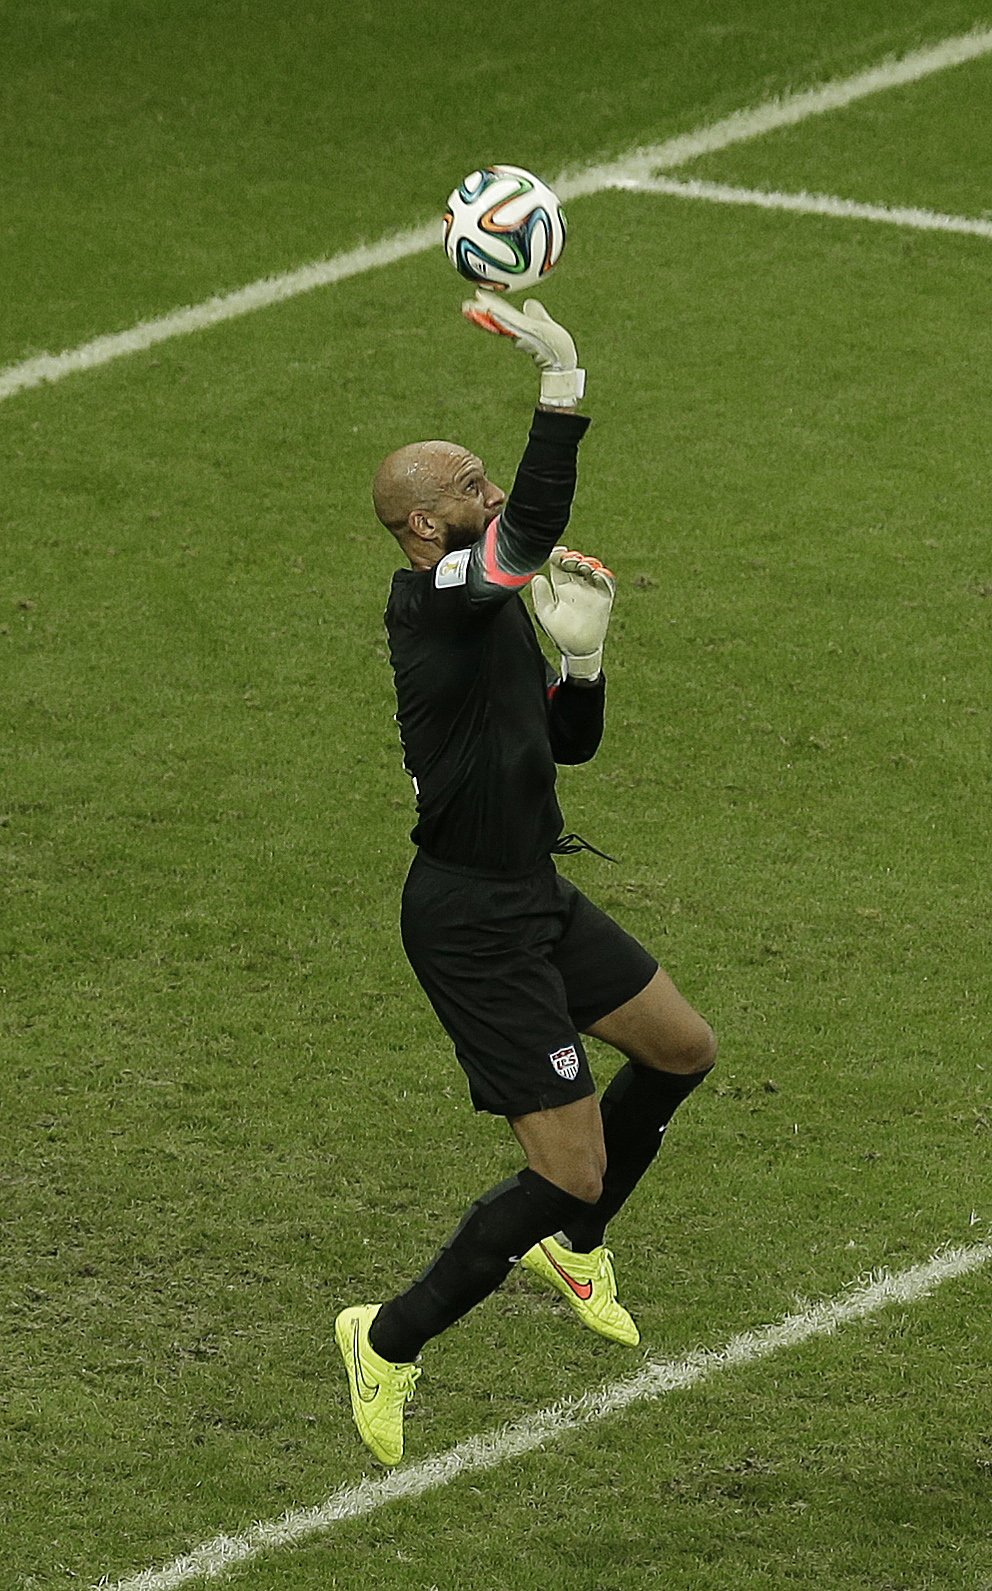 United States goalkeeper Tim Howard deflects a ball during the World Cup round of 16 soccer match between Belgium and the USA at the Arena Fonte Nova in Salvador, Brazil on July 1, 2014.